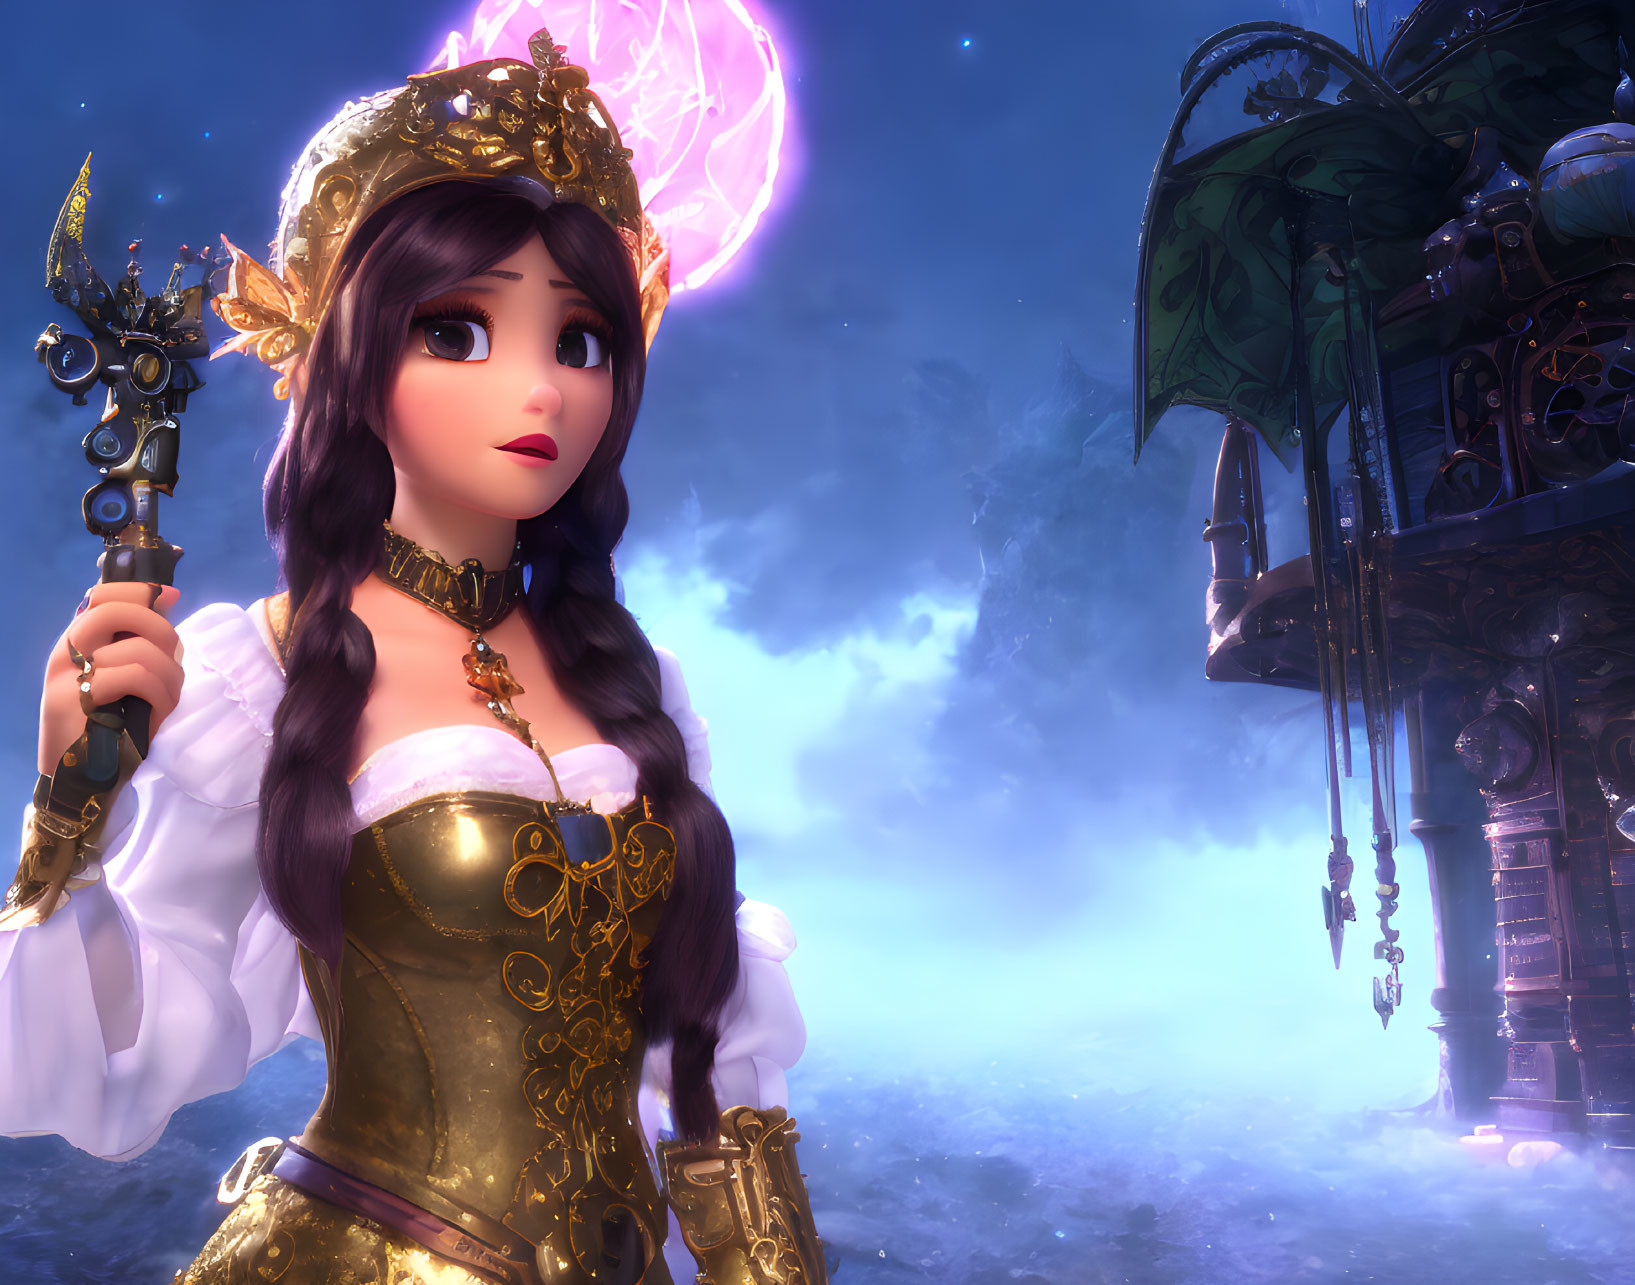 Animated female character with large eyes holding a scepter in gold and white outfit against mystical night sky.